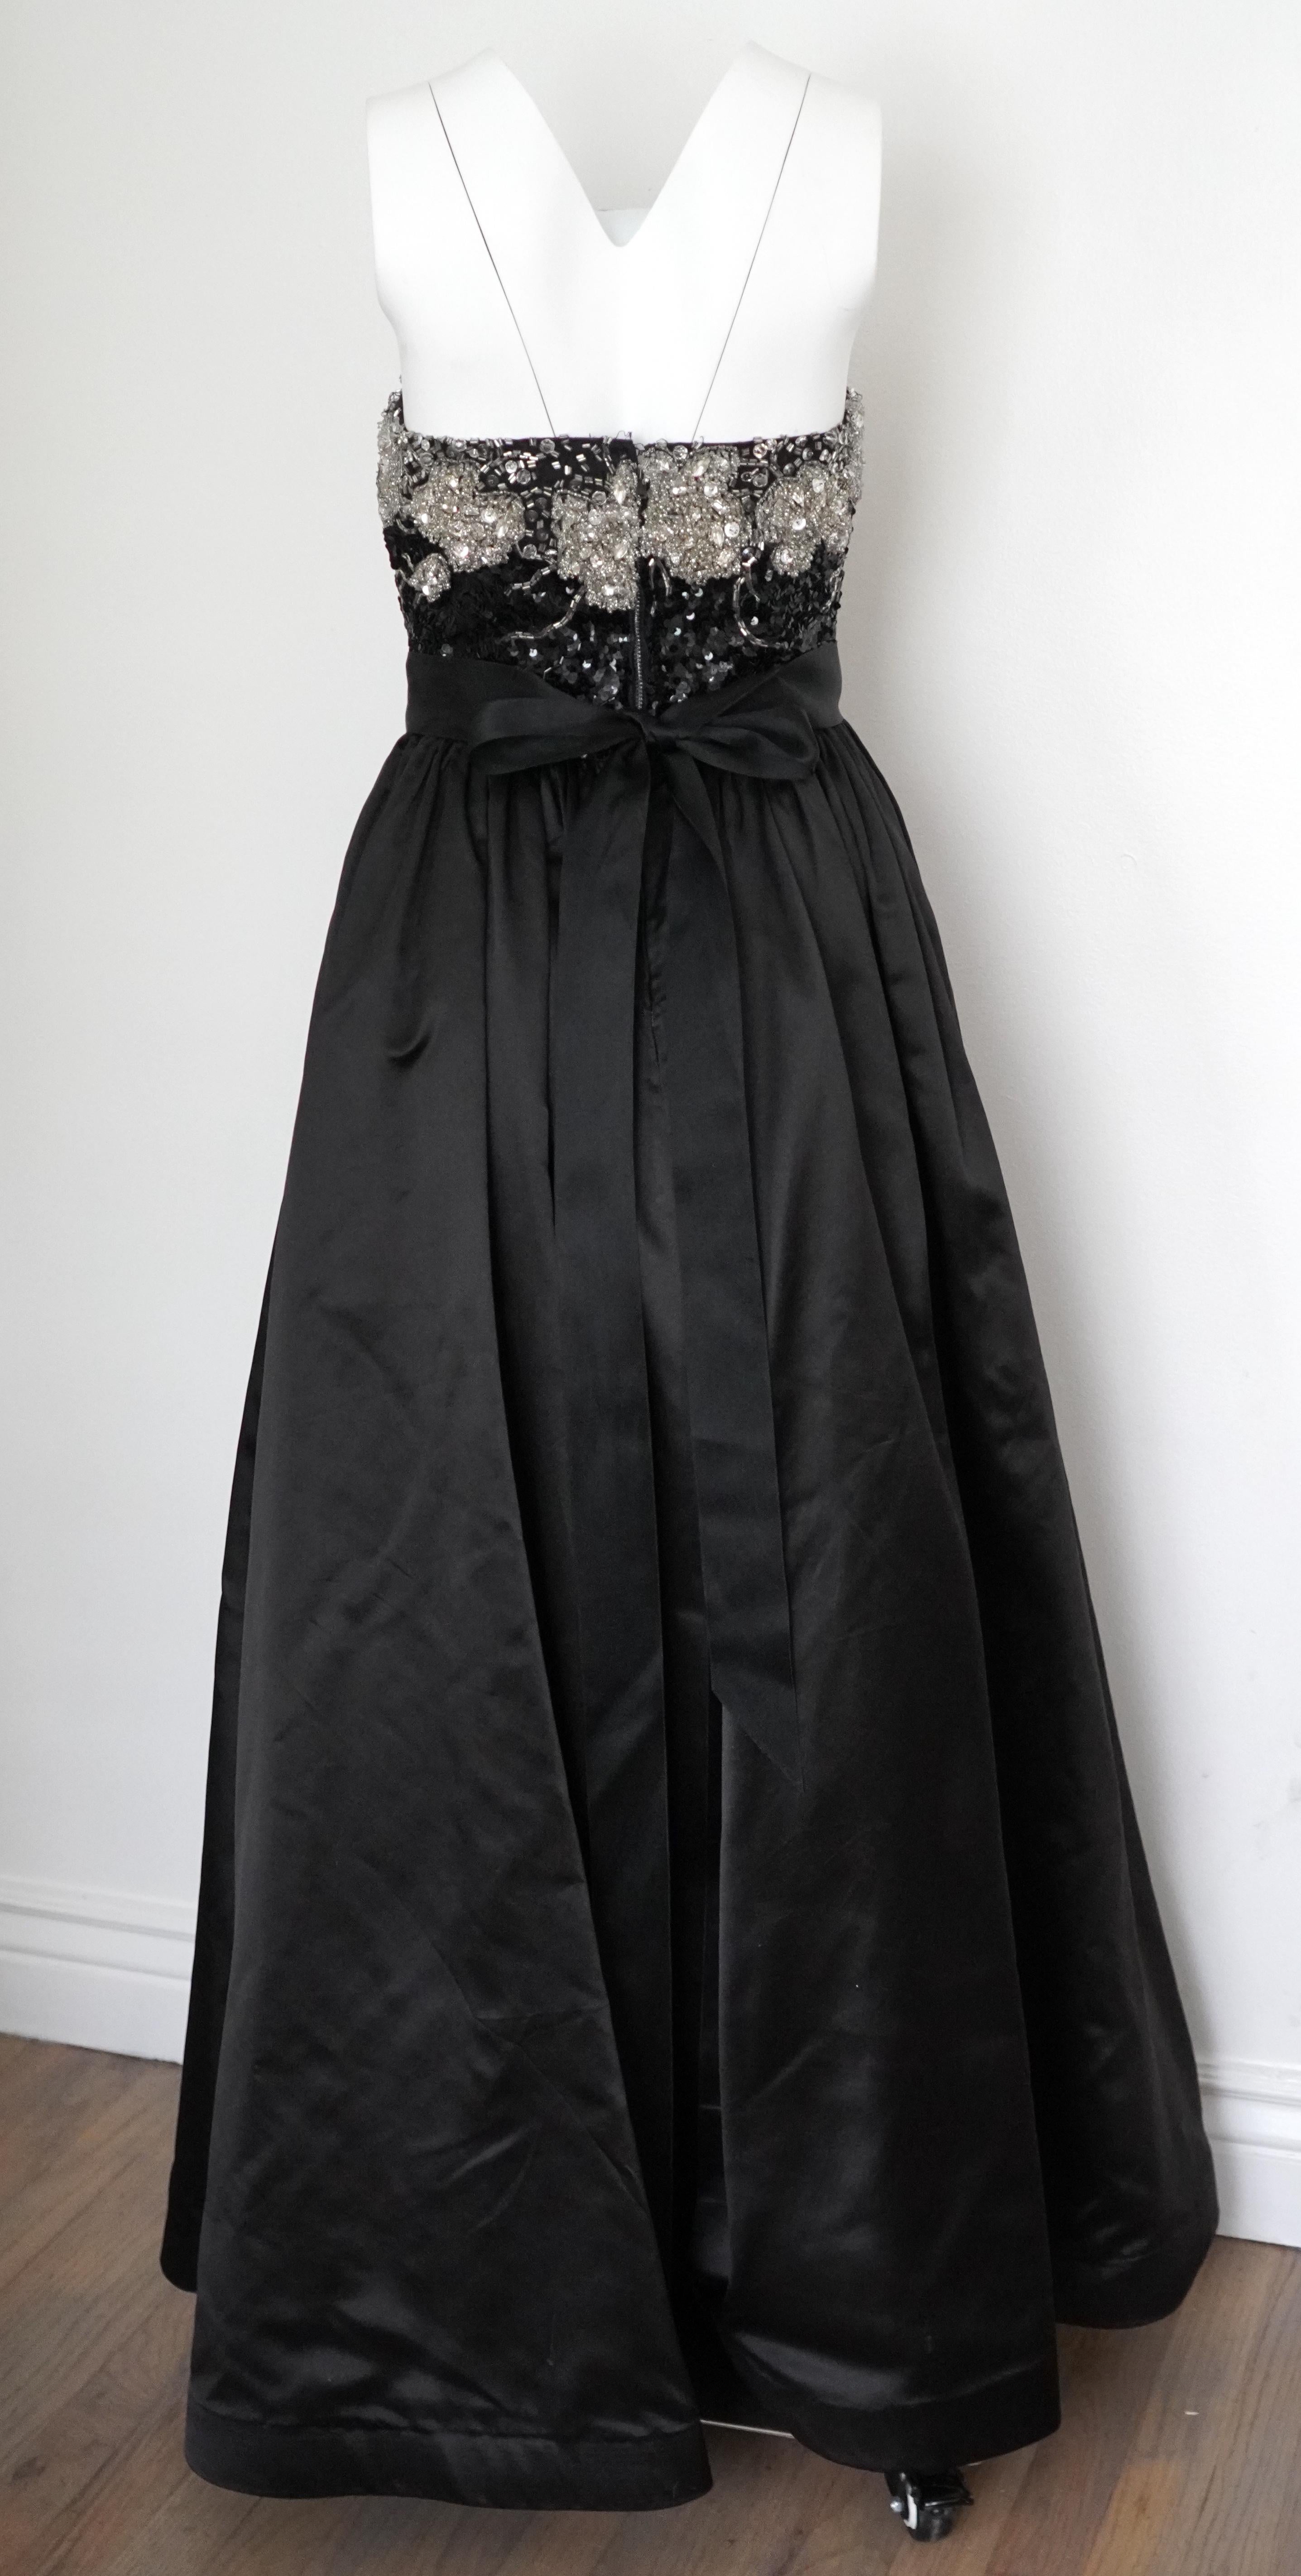 The Vintage Oscar de la Renta evening gown is a true masterpiece of elegance and glamour. Crafted from luxurious black silk, this strapless gown drapes beautifully, exuding a sense of timeless sophistication. The bodice features Swarovski (silver,